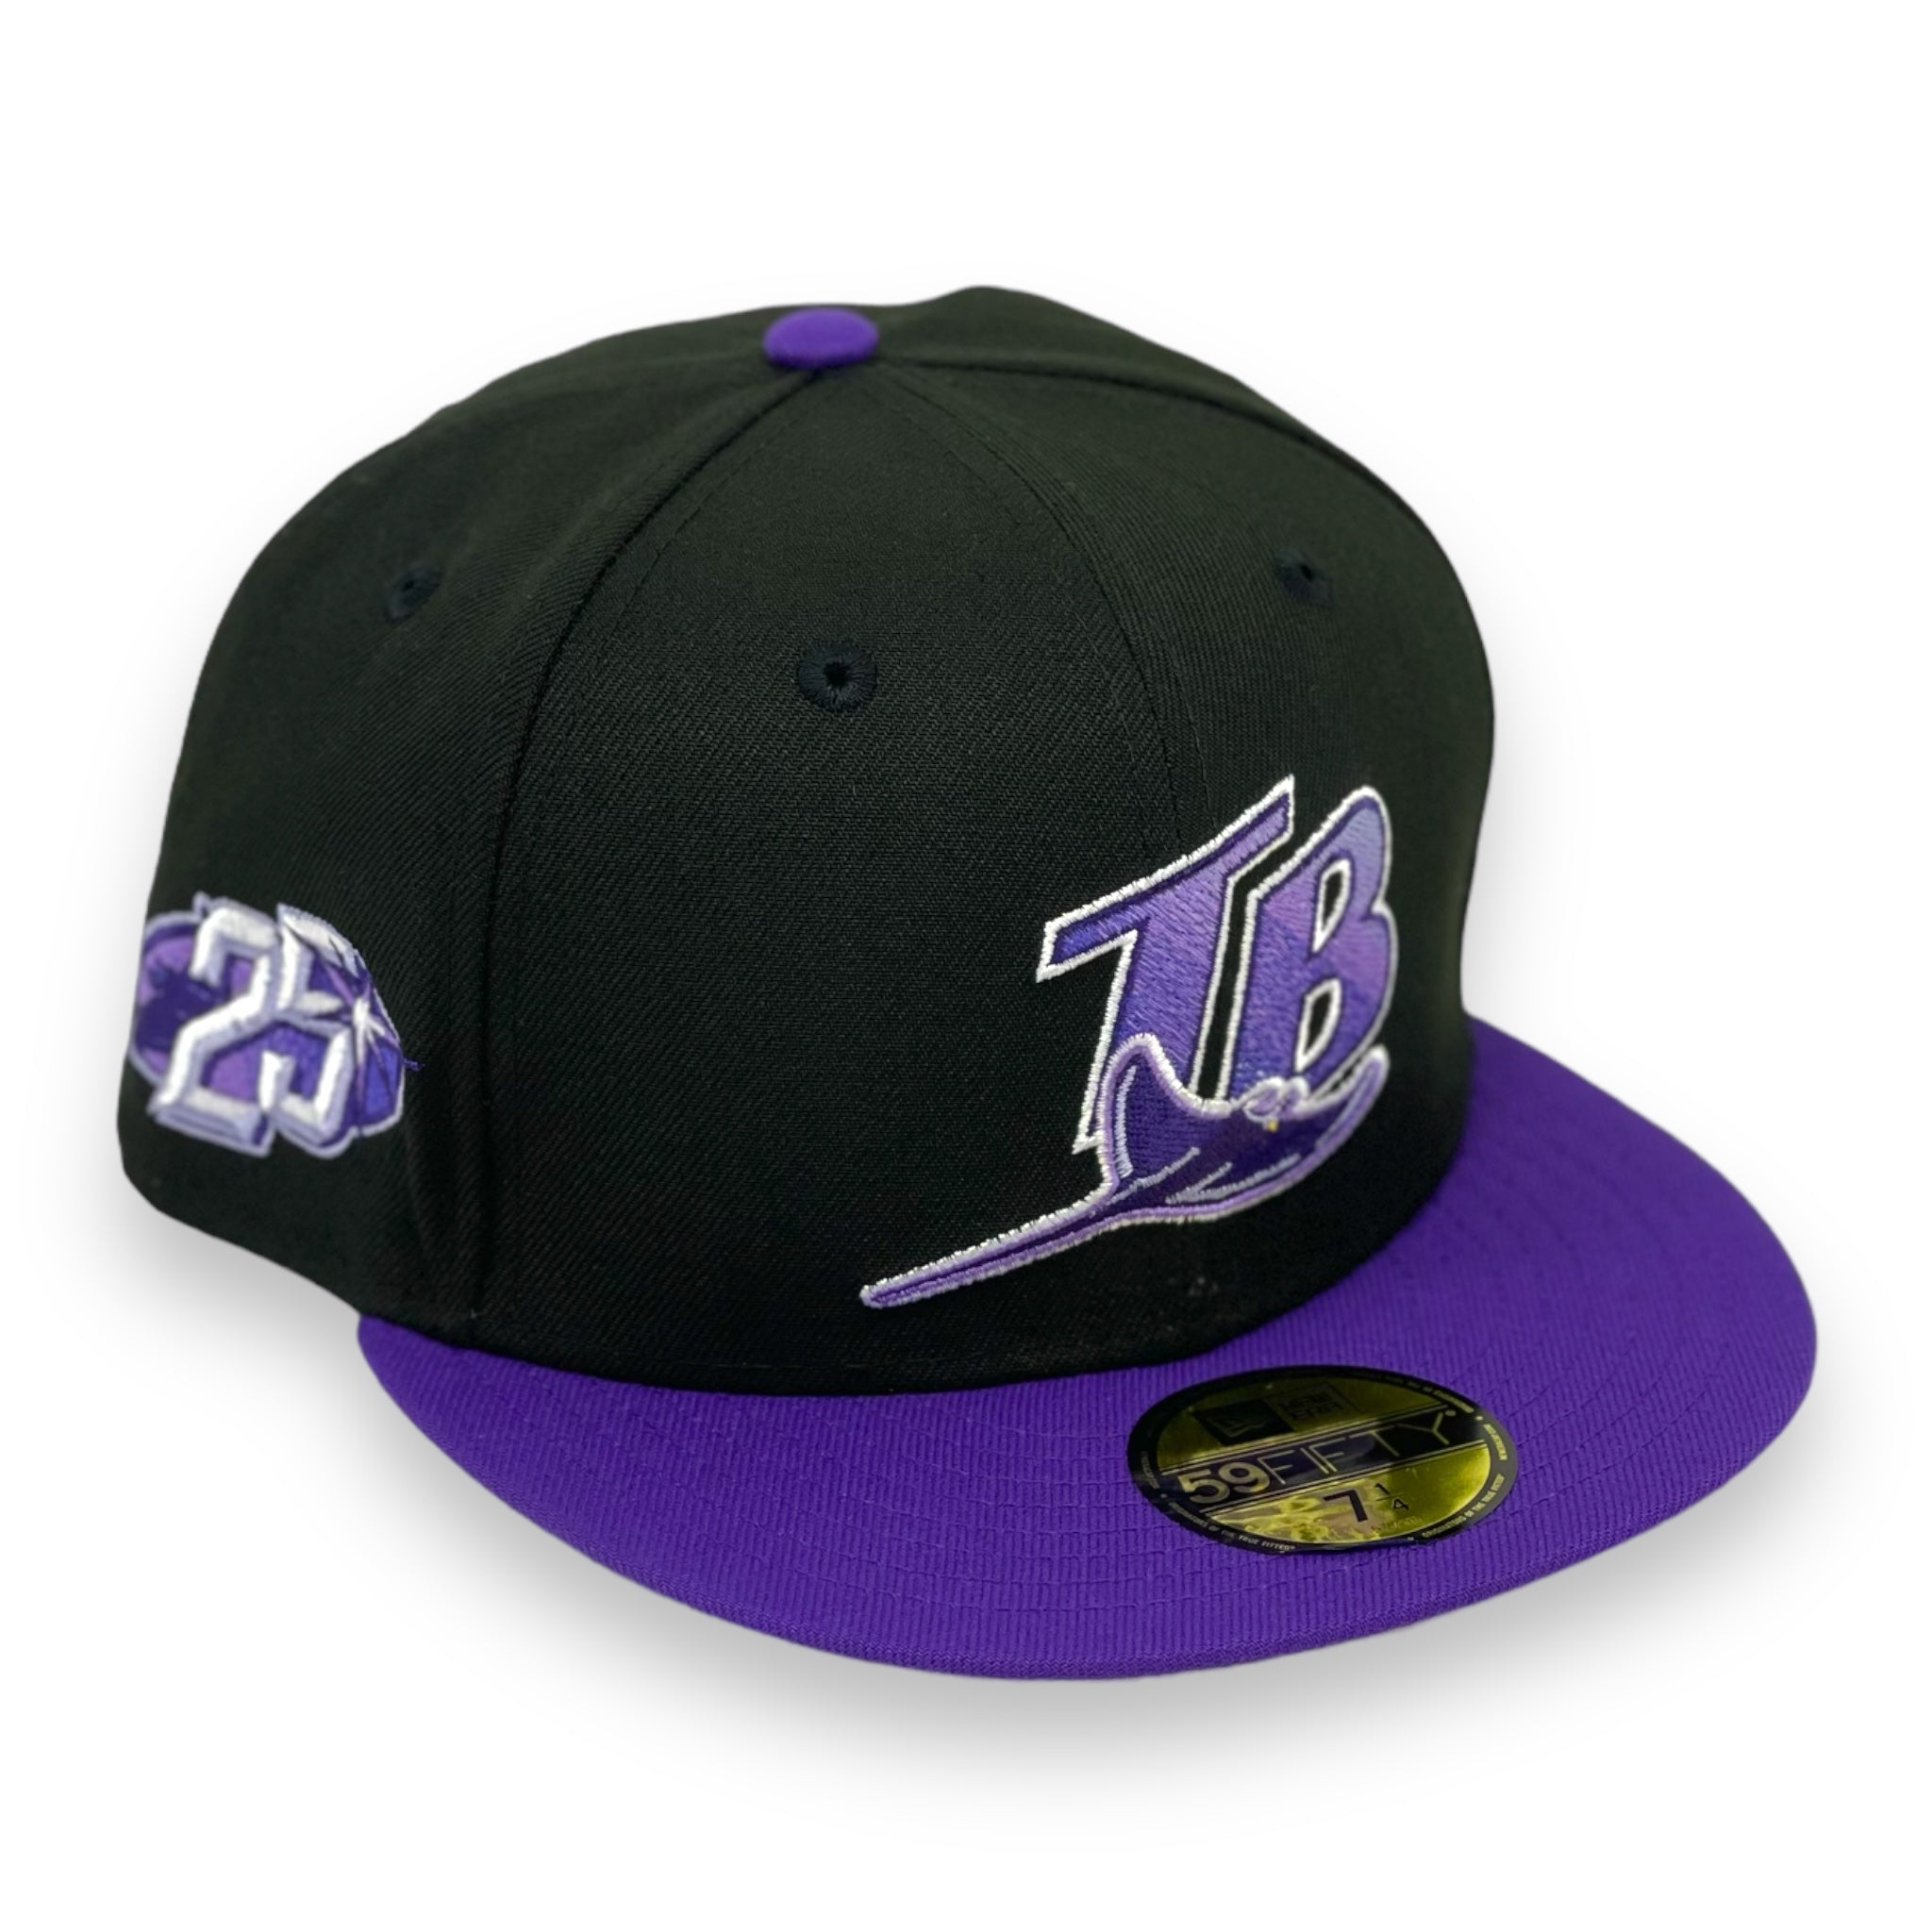 TAMPA BAY DEVIL RAYS (BLACK) (25TH ANN) NEW ERA 59FIFTY FITTED